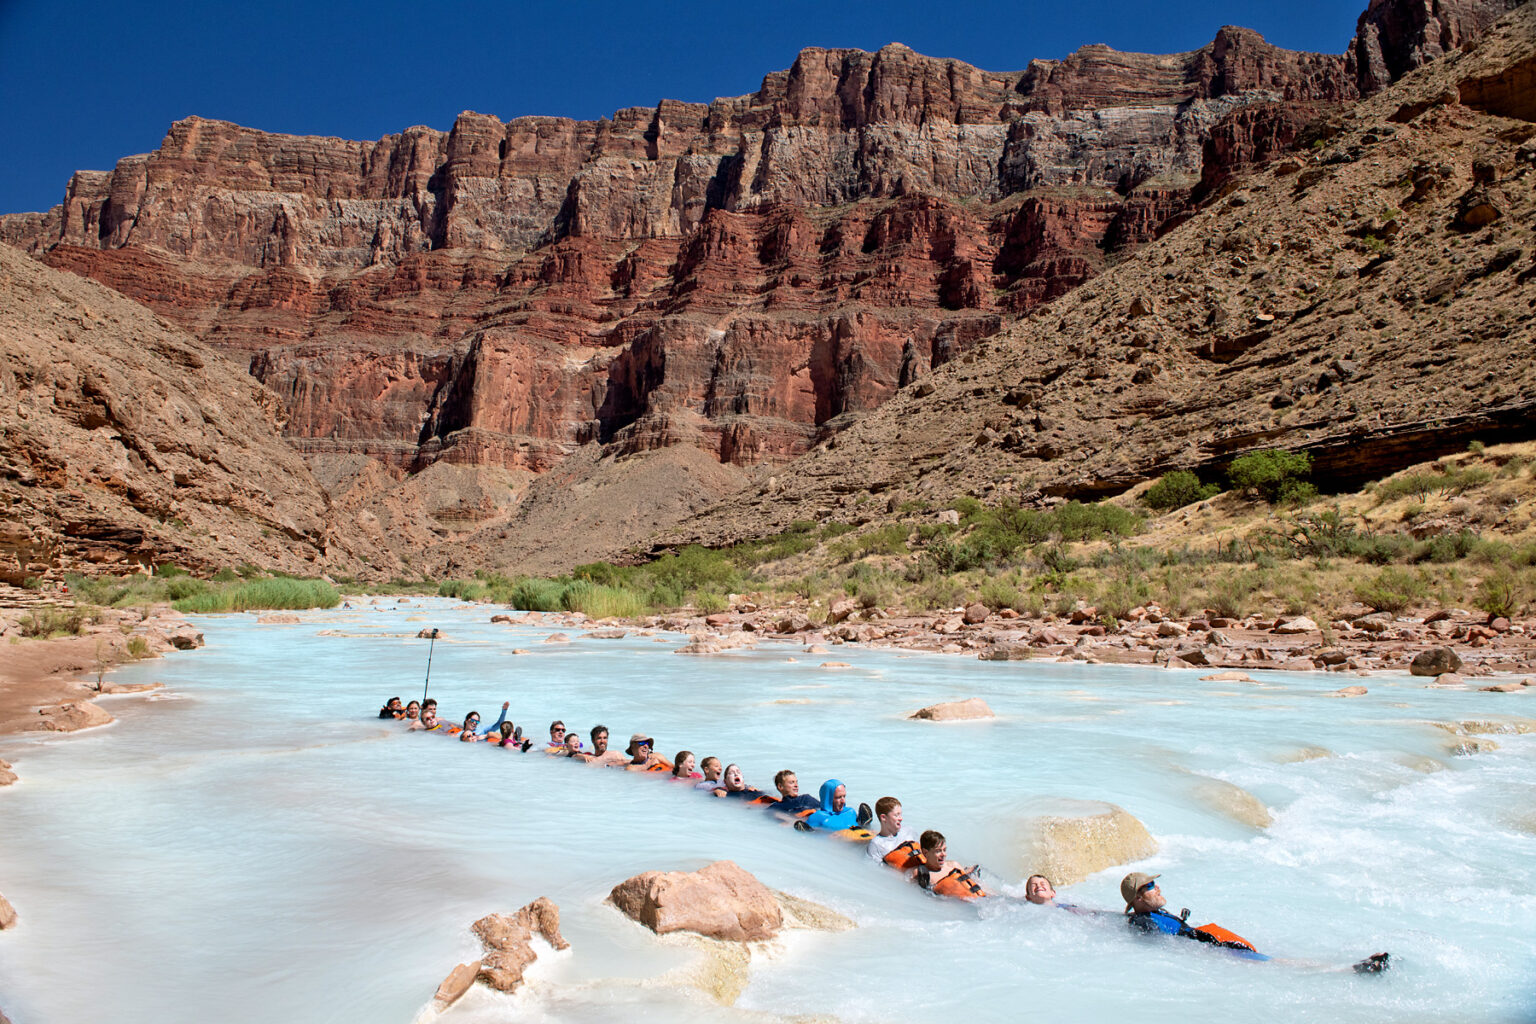 21 guides and guests link arms and legs together to form a chain and float down the azure waters of the Little Colorado River in Grand Canyon